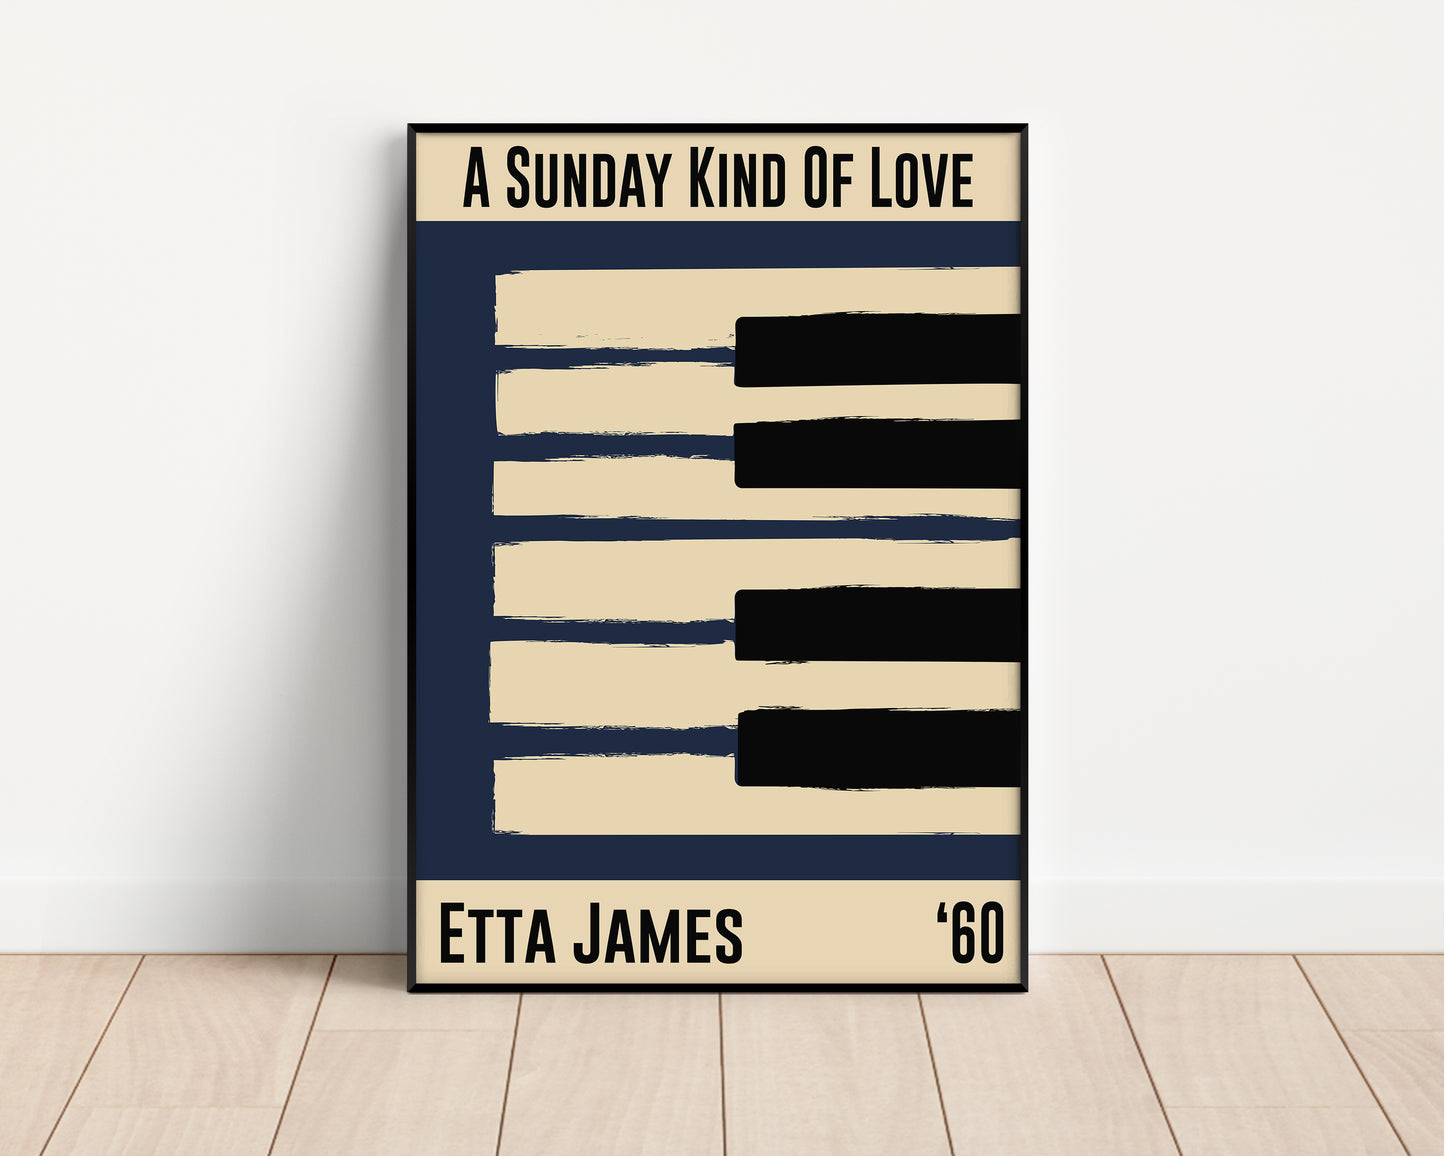 Framed jazz poster featuring a piano design and Etta James' 1960 song 'Sunday Kind of Love'. Vintage music decor, classic jazz art, perfect for jazz enthusiasts and Etta James fans.